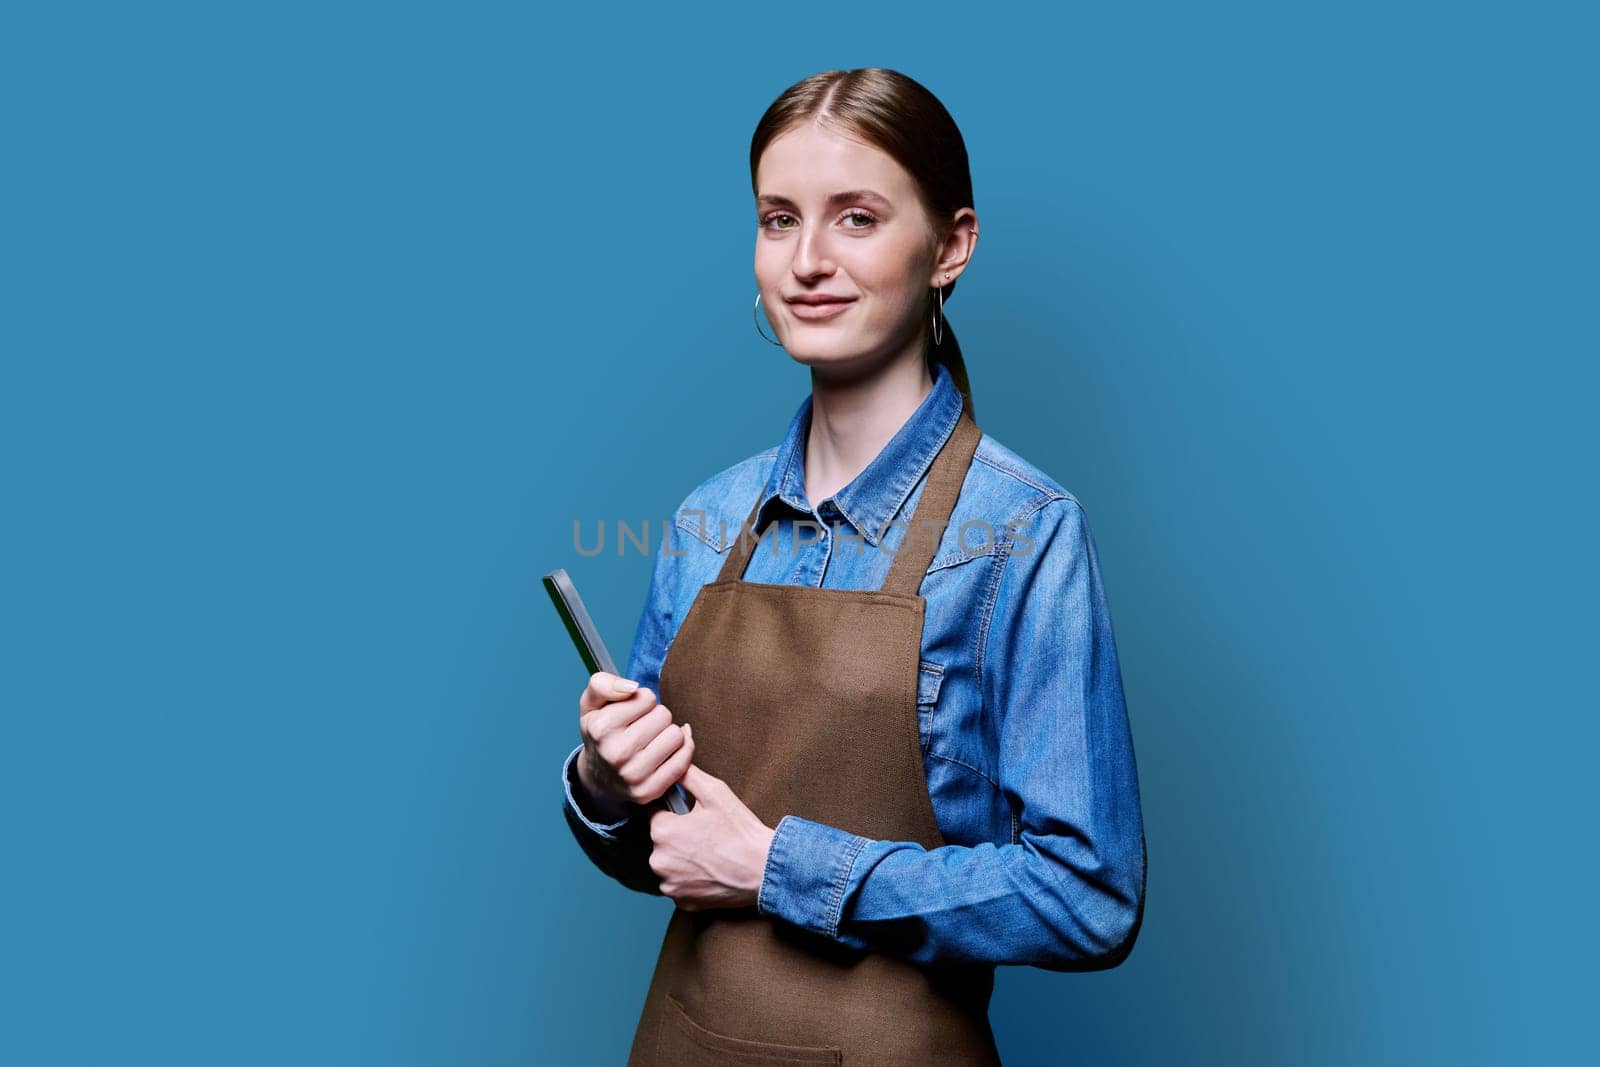 Young smiling female worker in apron uniform holding digital tablet on blue studio background. Digital technologies in business work, Internet apps applications for online orders and customer service